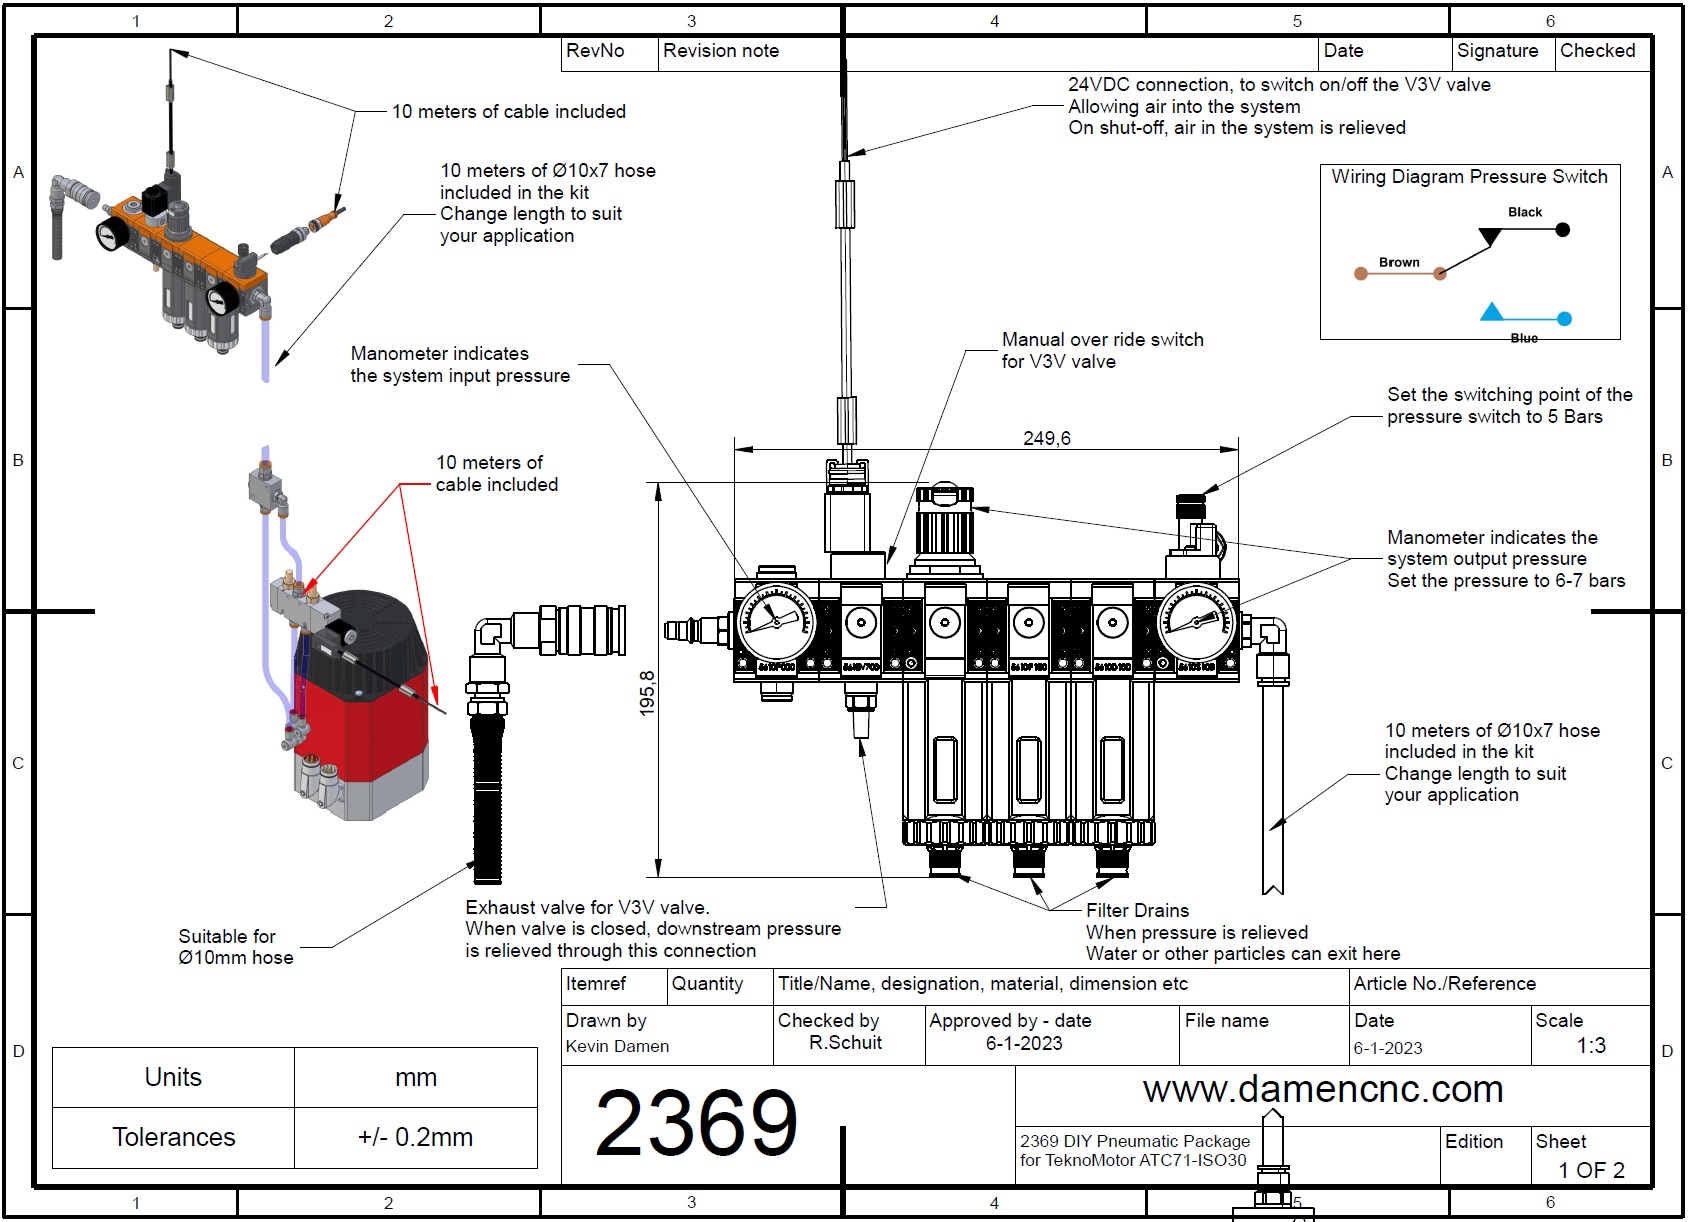 23693 diy pneumatic package for teknomotor atc71iso30 connection diagram 1